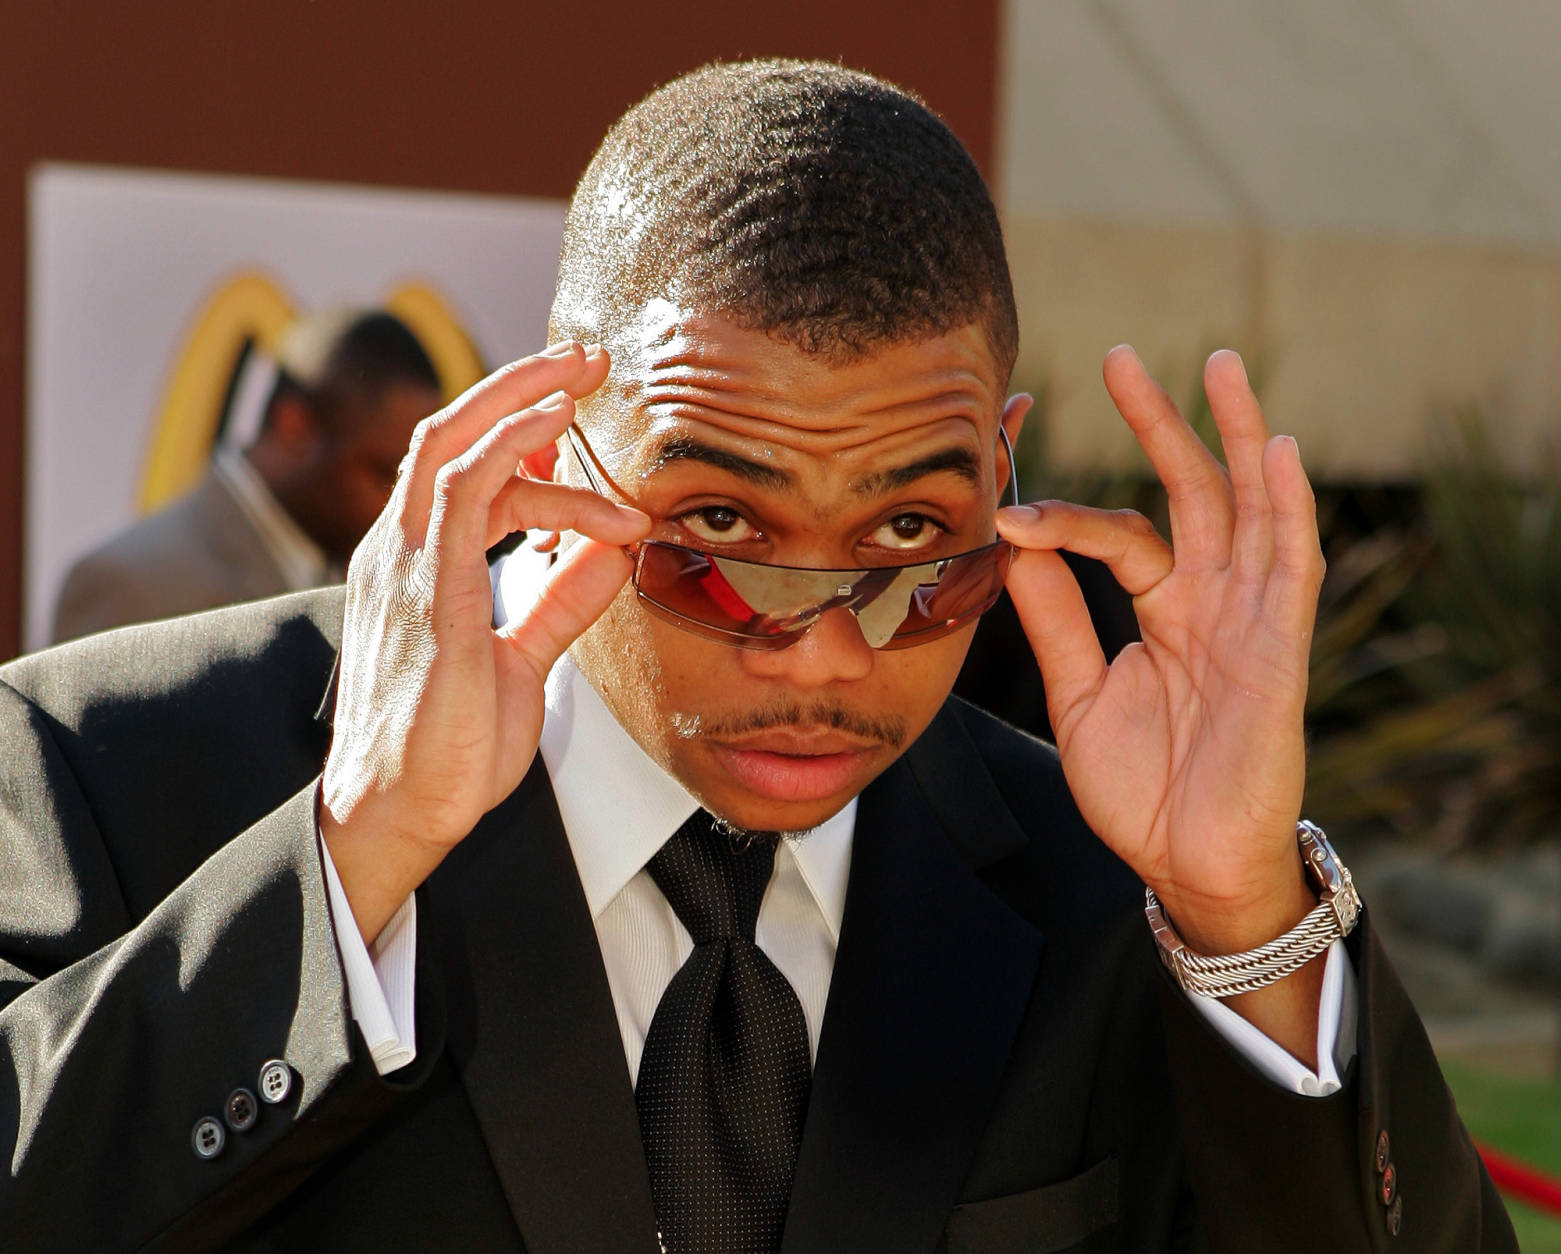 Actor Omar Gooding poses at the 10th Annual Soul Train Lady of Soul Awards, Wednesday night, Sept. 7, 2005, in Pasadena, Calif. (AP Photo/Mark J. Terrill)